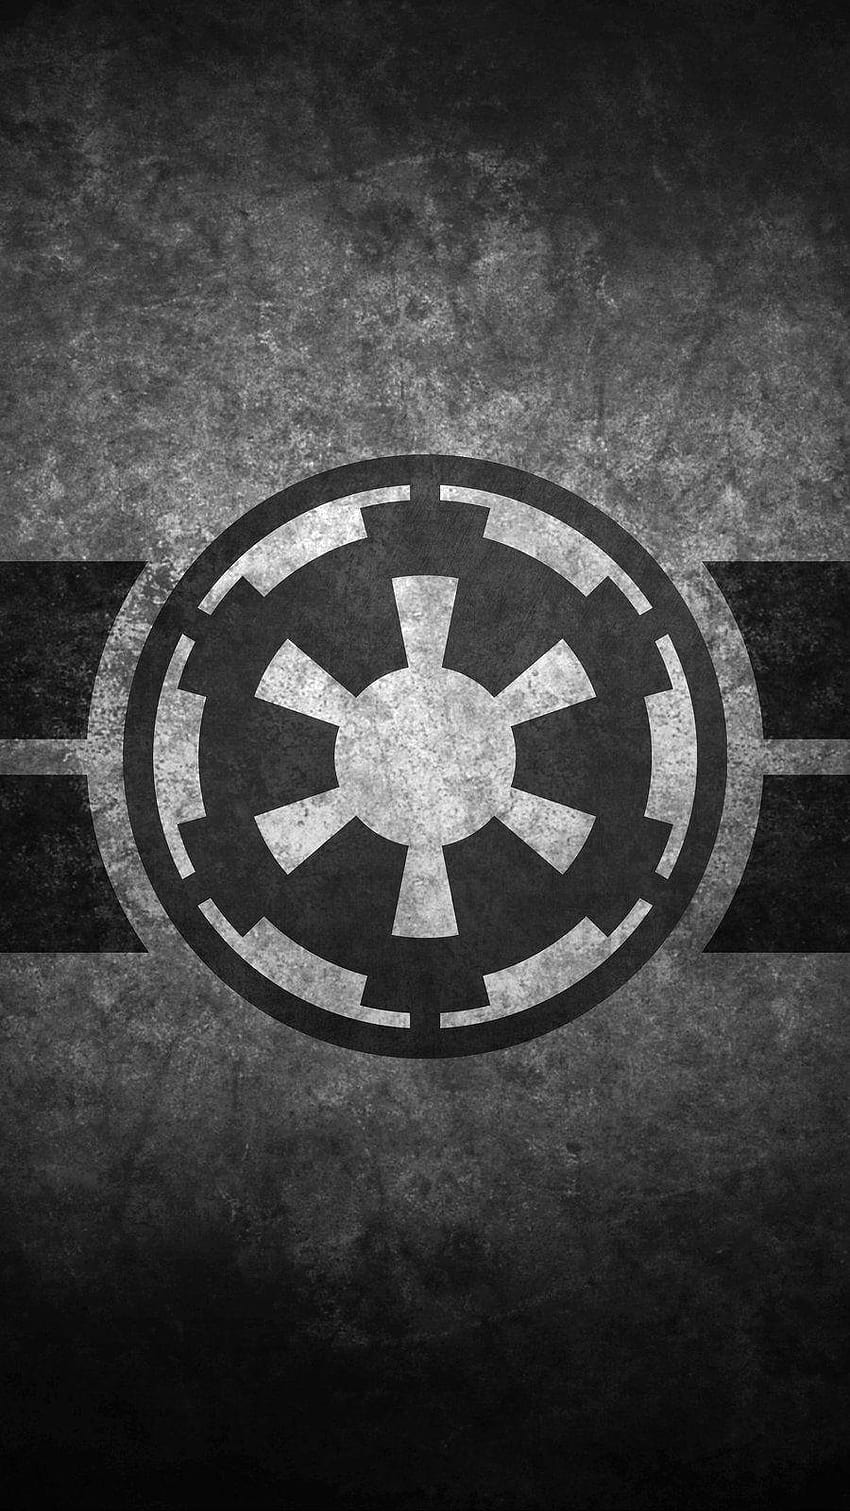 Black Cell Phone Group, star wars imperial logo HD phone wallpaper